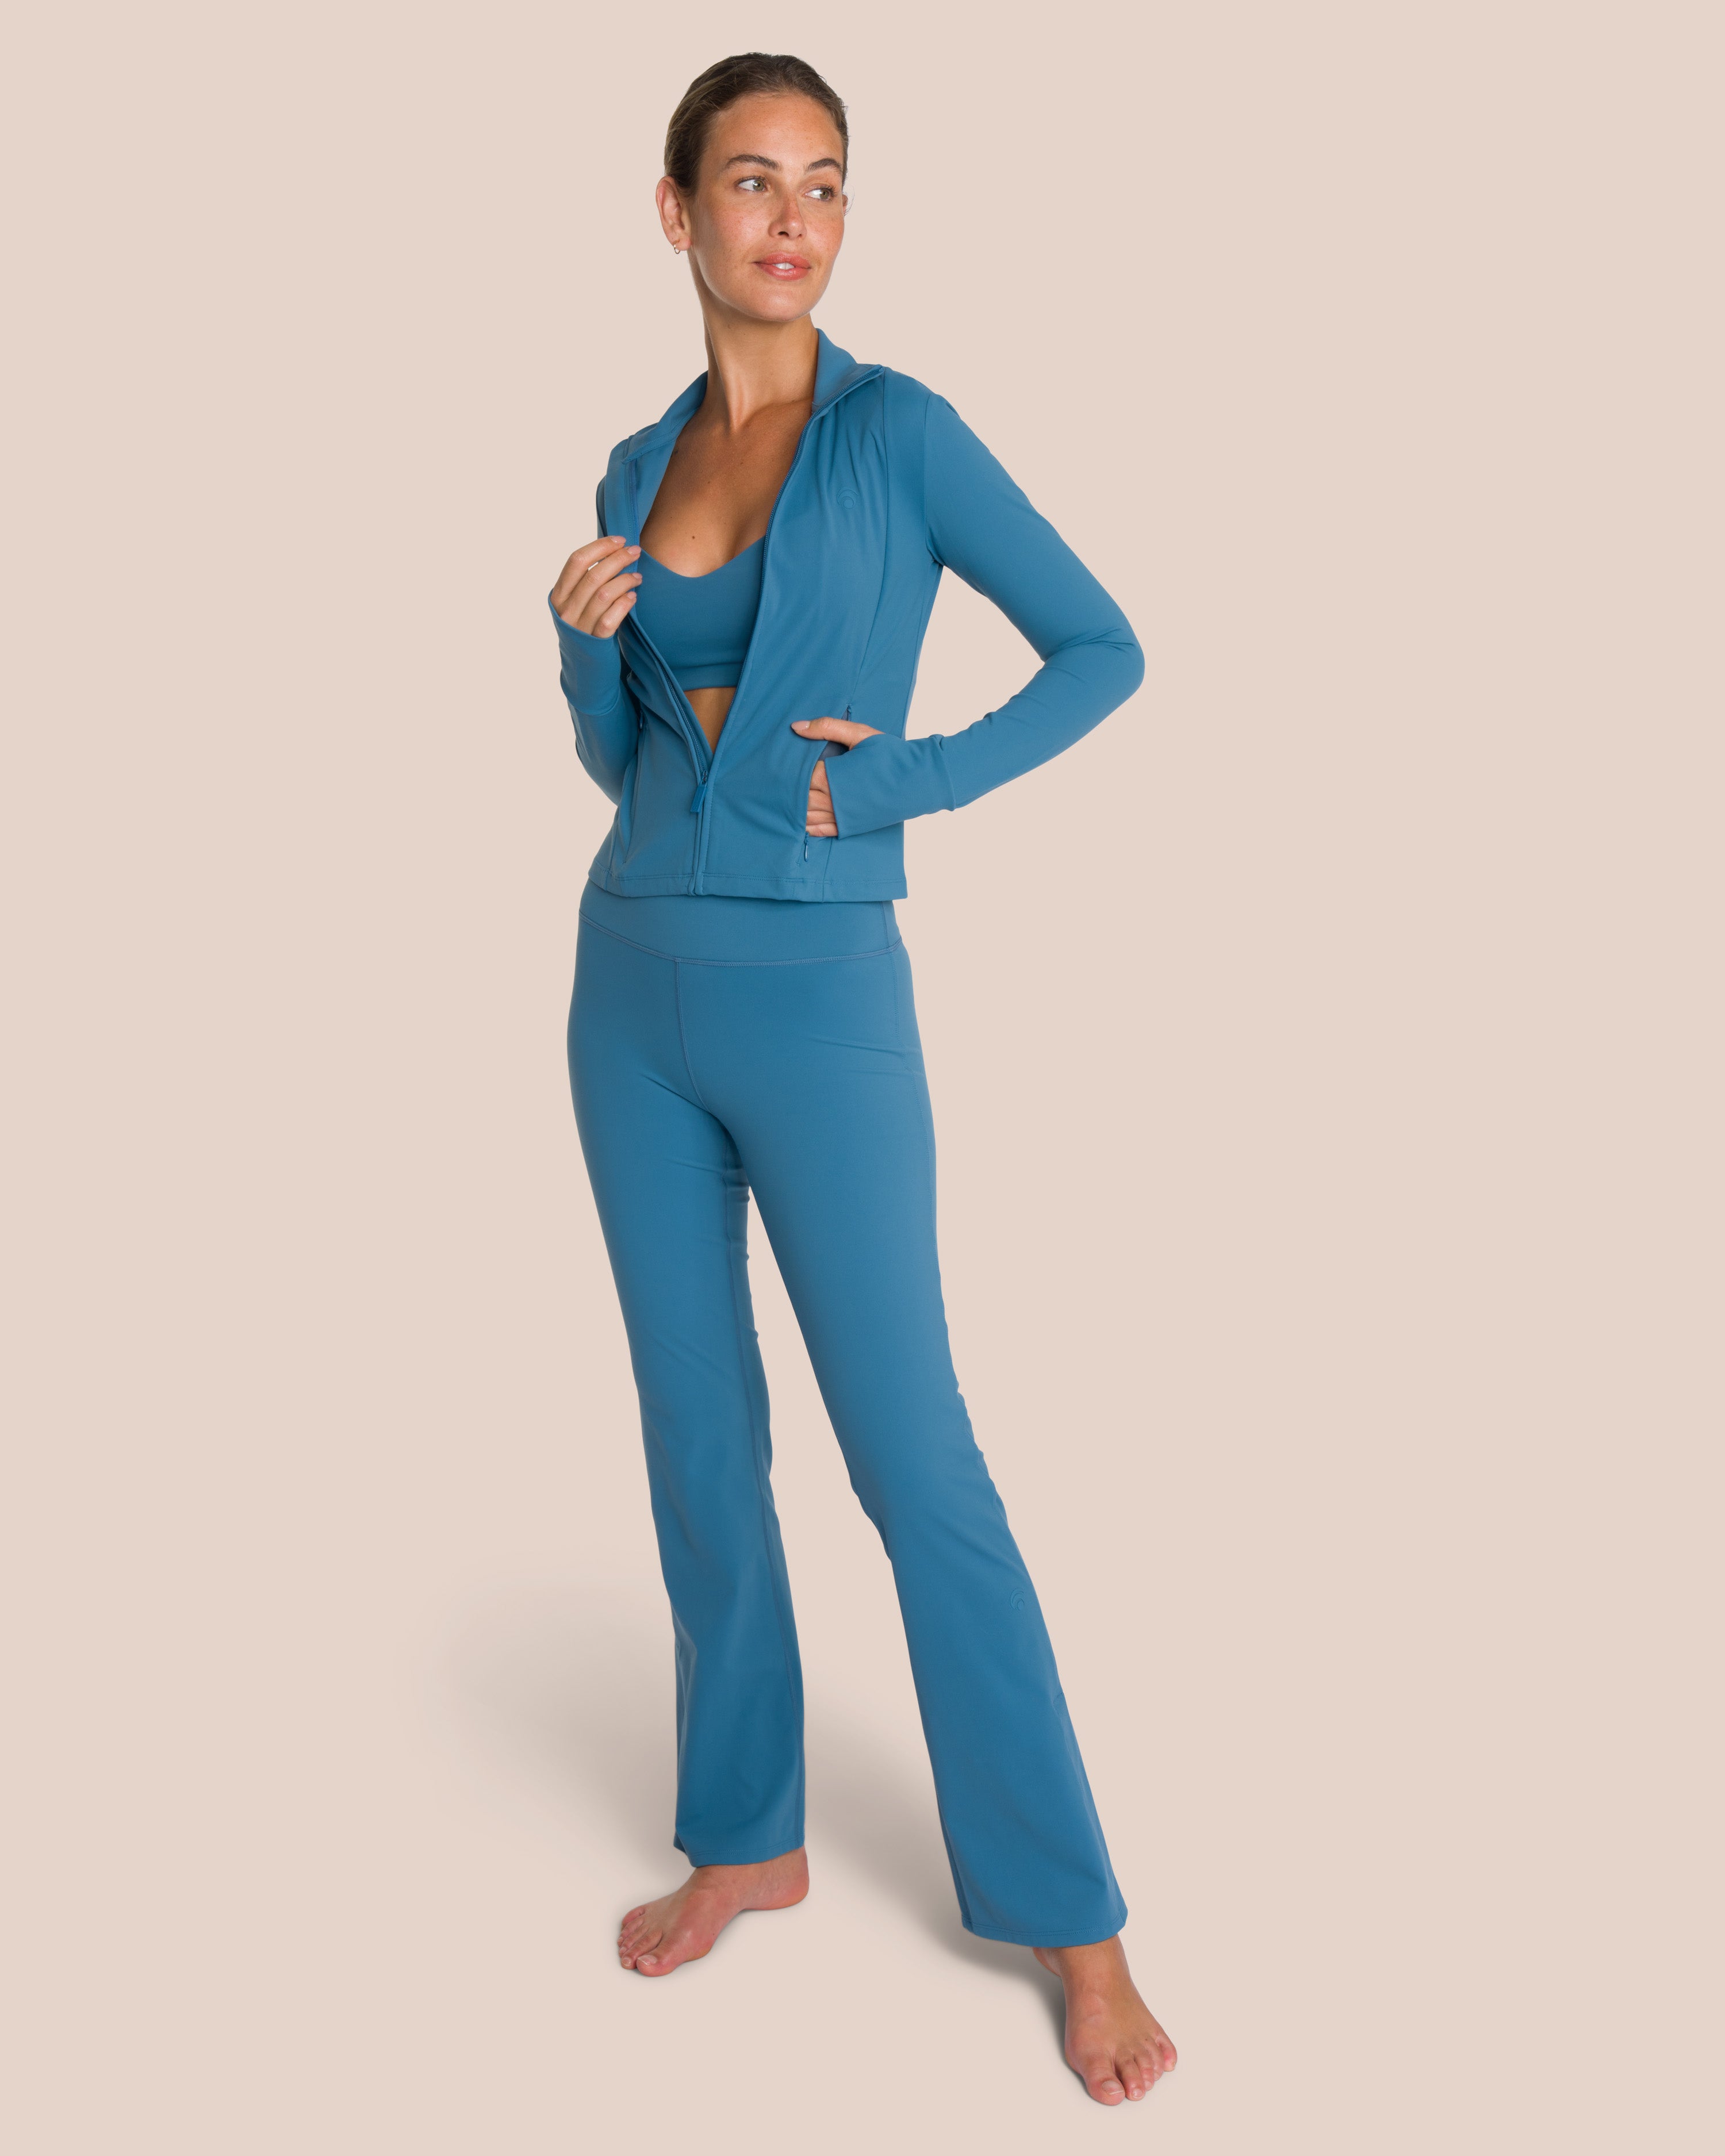 Shania Flared Zip Set Deluxe - Teal